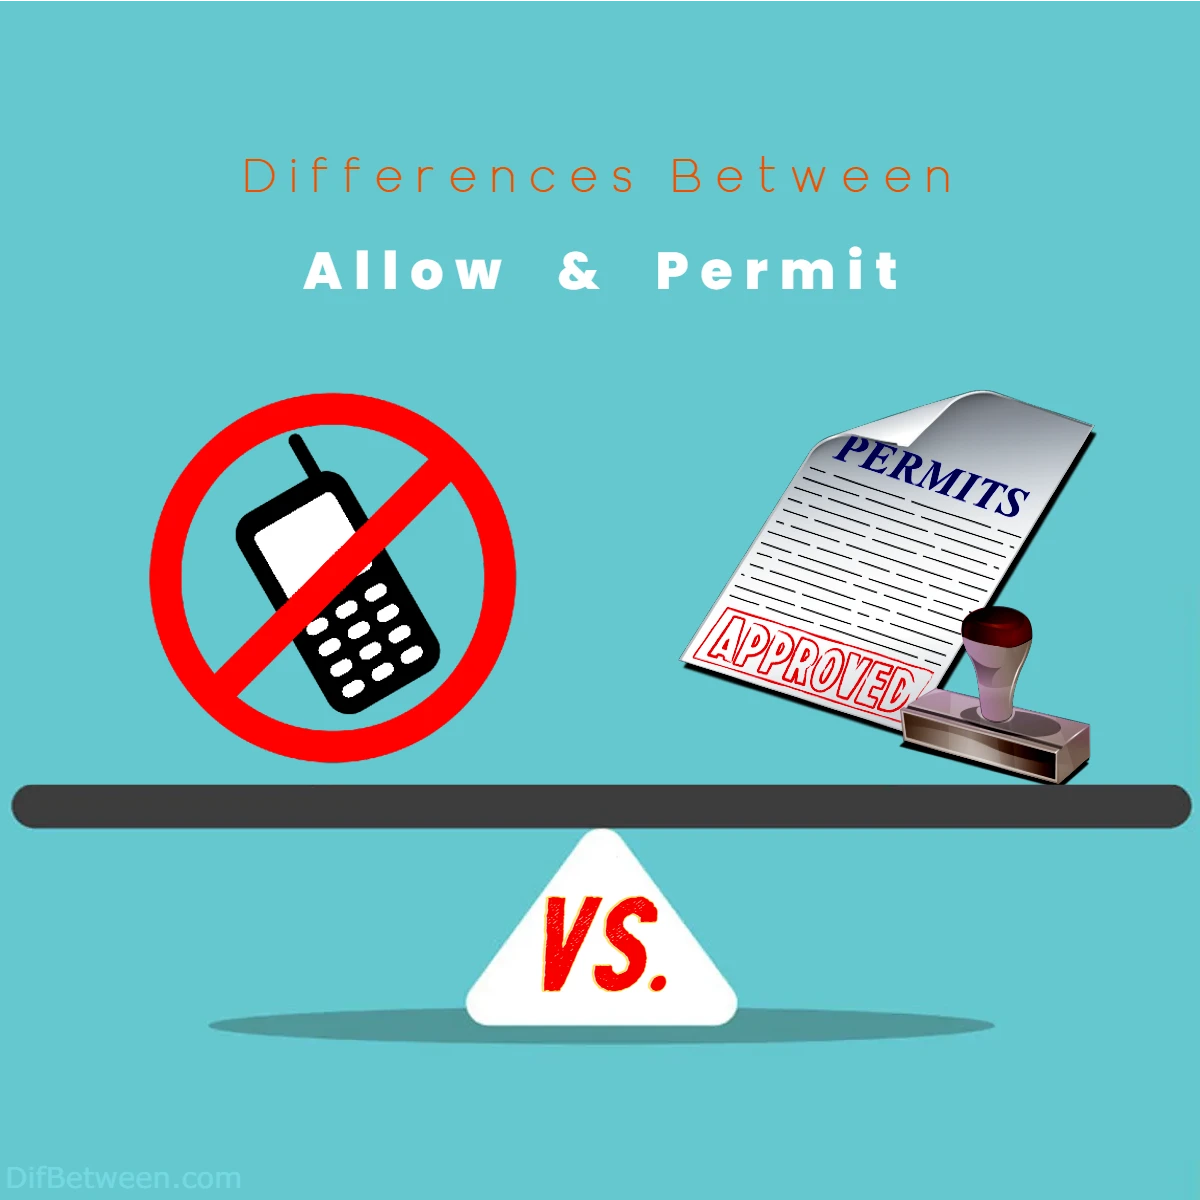 Differences Between Allow vs Permit